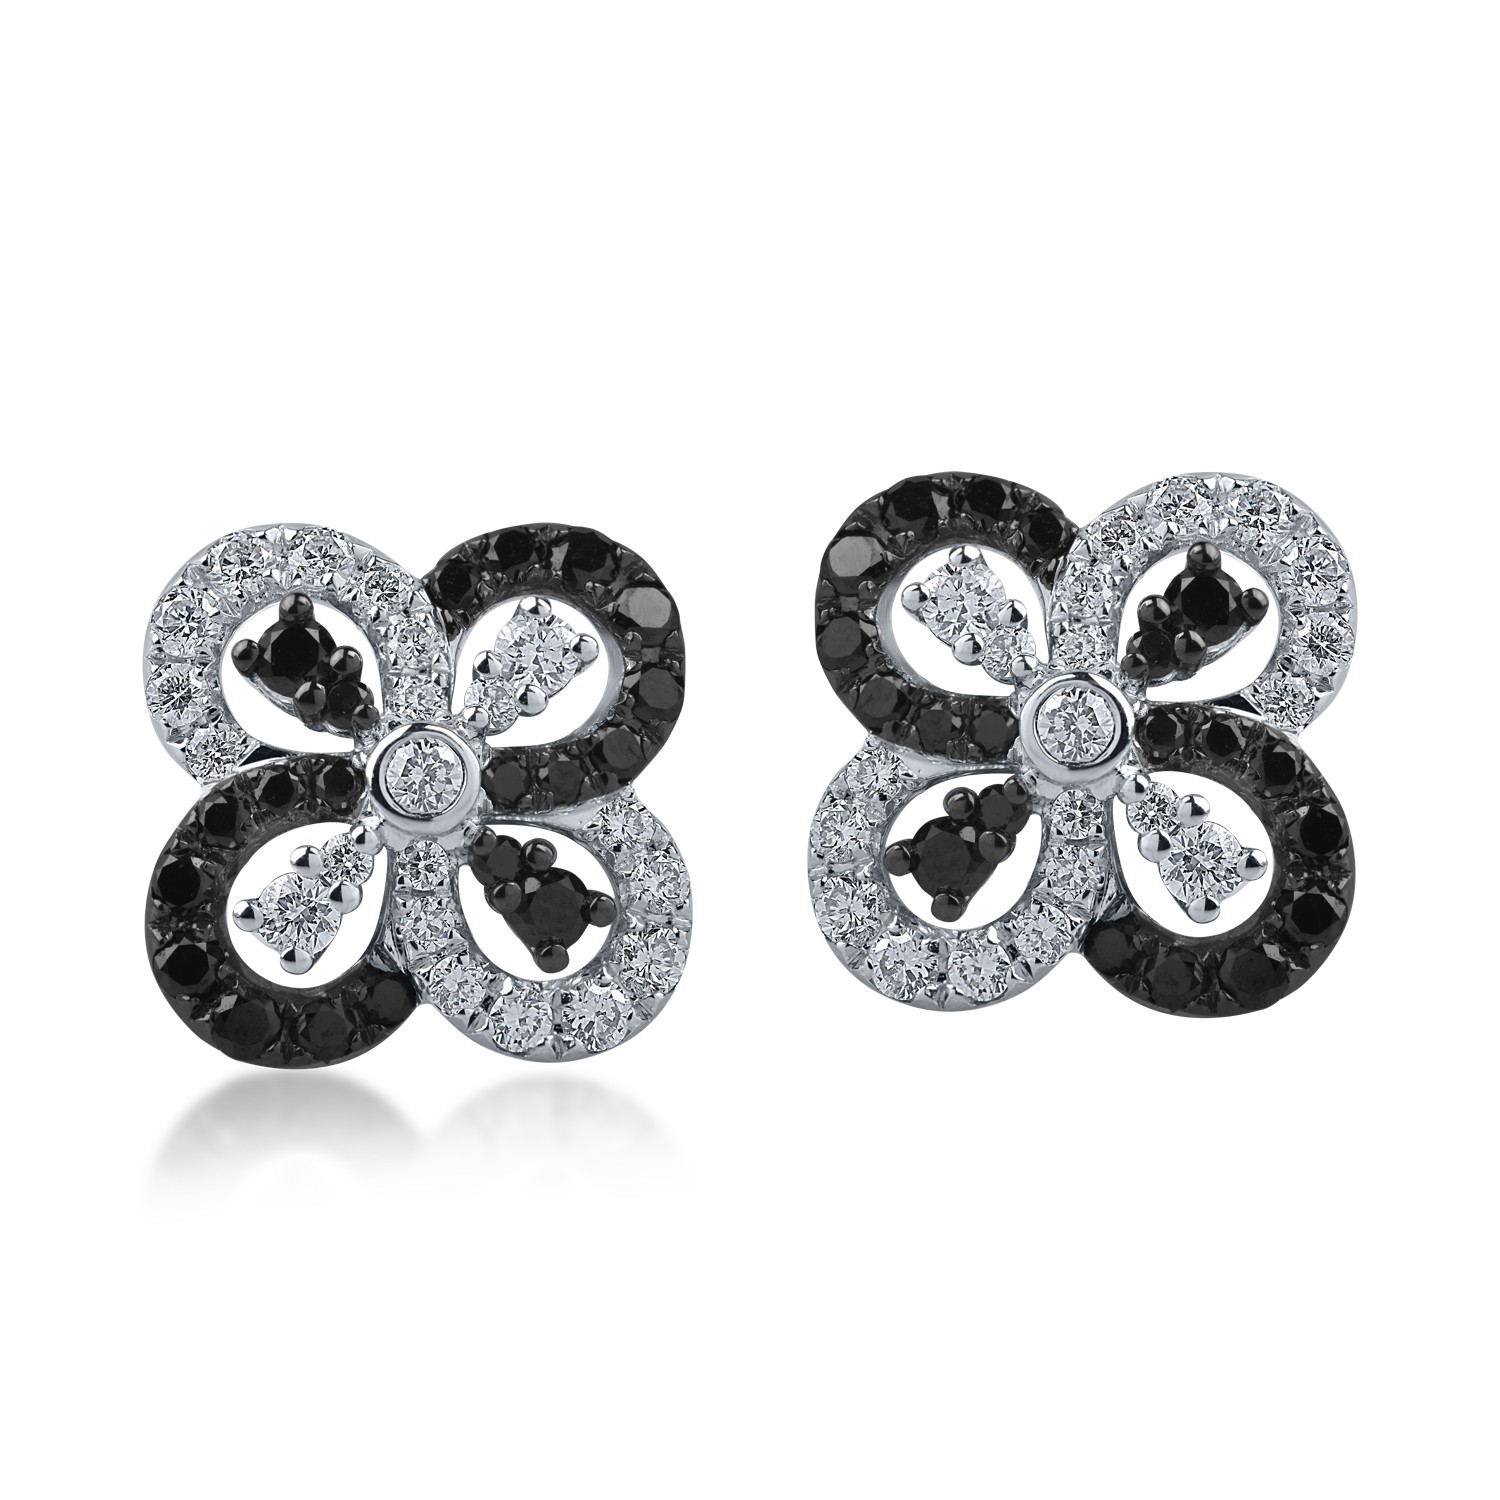 White gold geometric earrings with 0.4ct black diamonds and 0.4ct clear diamonds